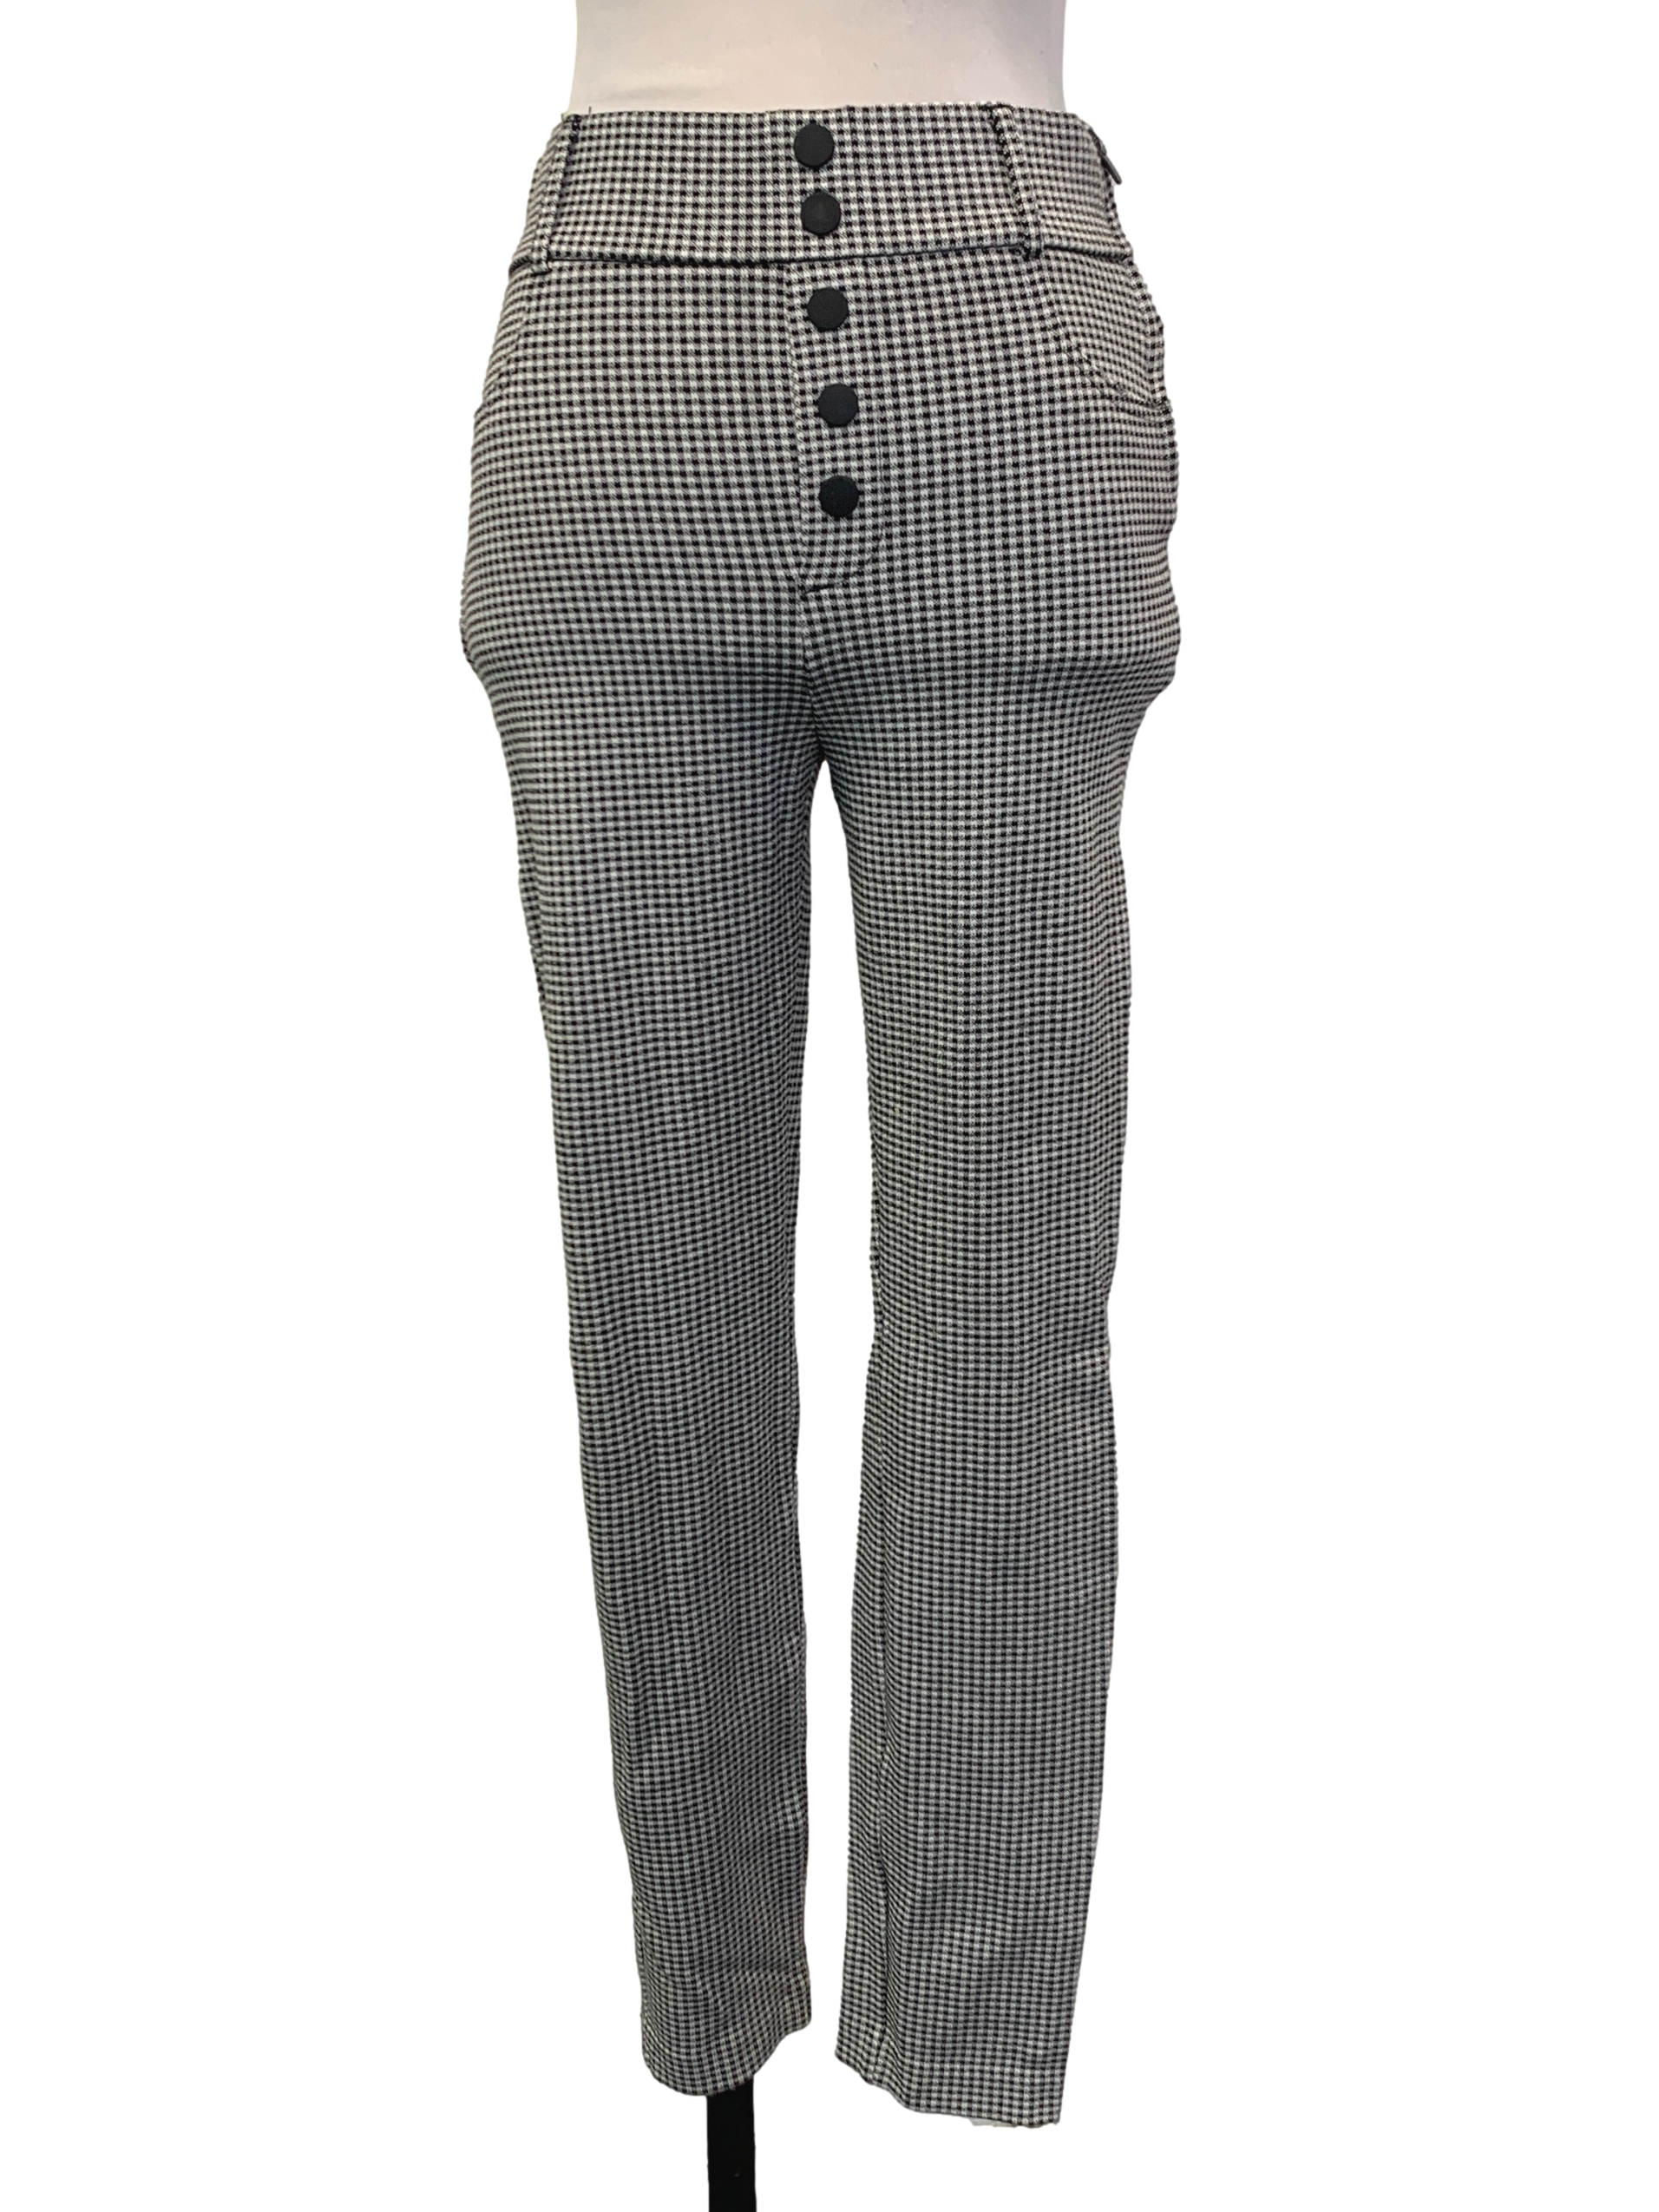 Black and White Gingham Pattern Pants